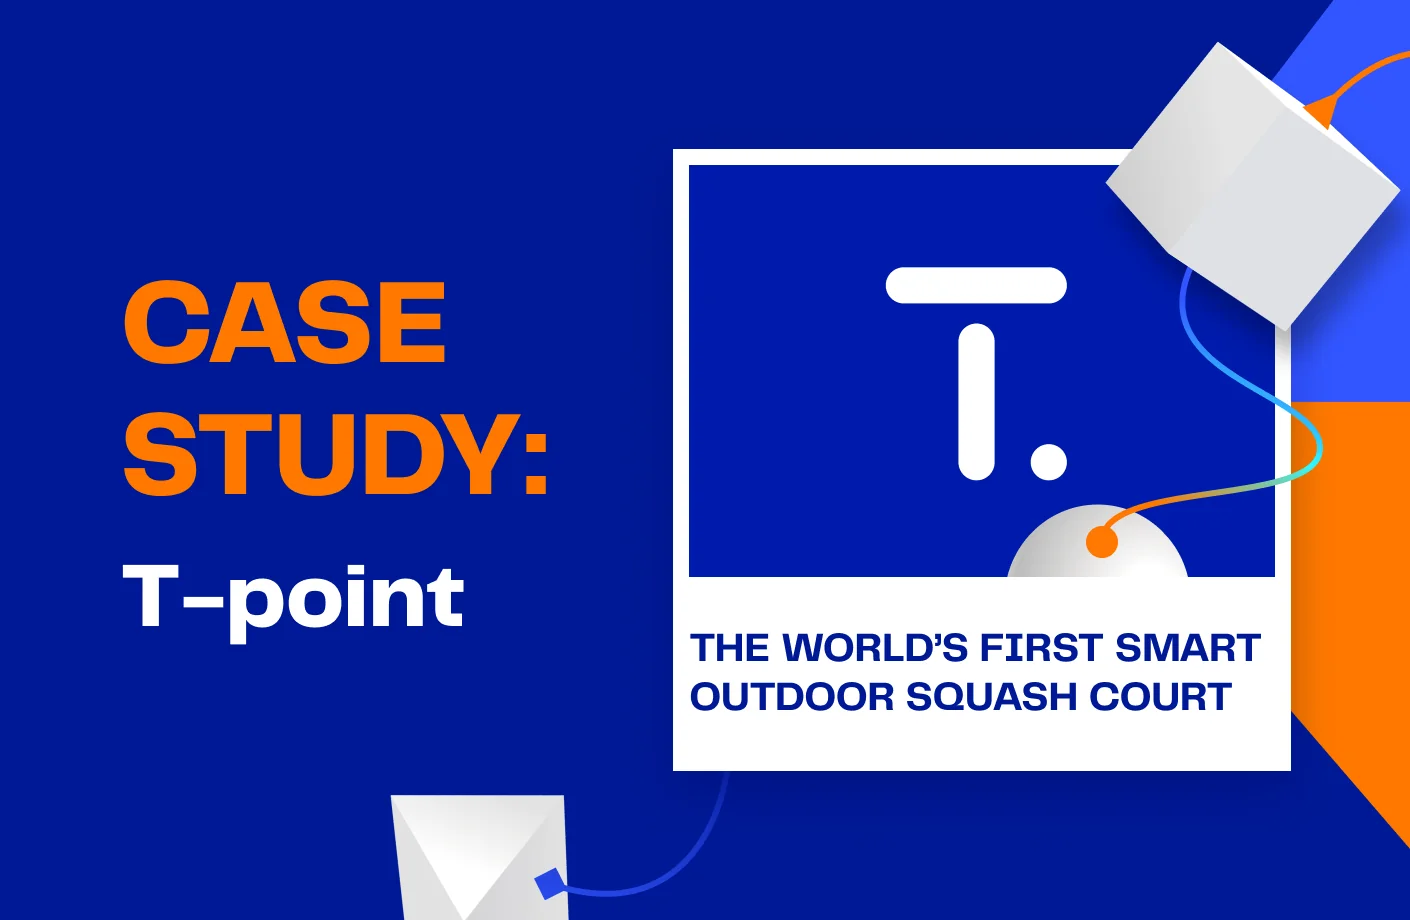 This image shows Tpoint, The World’s First Smart Outdoor Squash Court